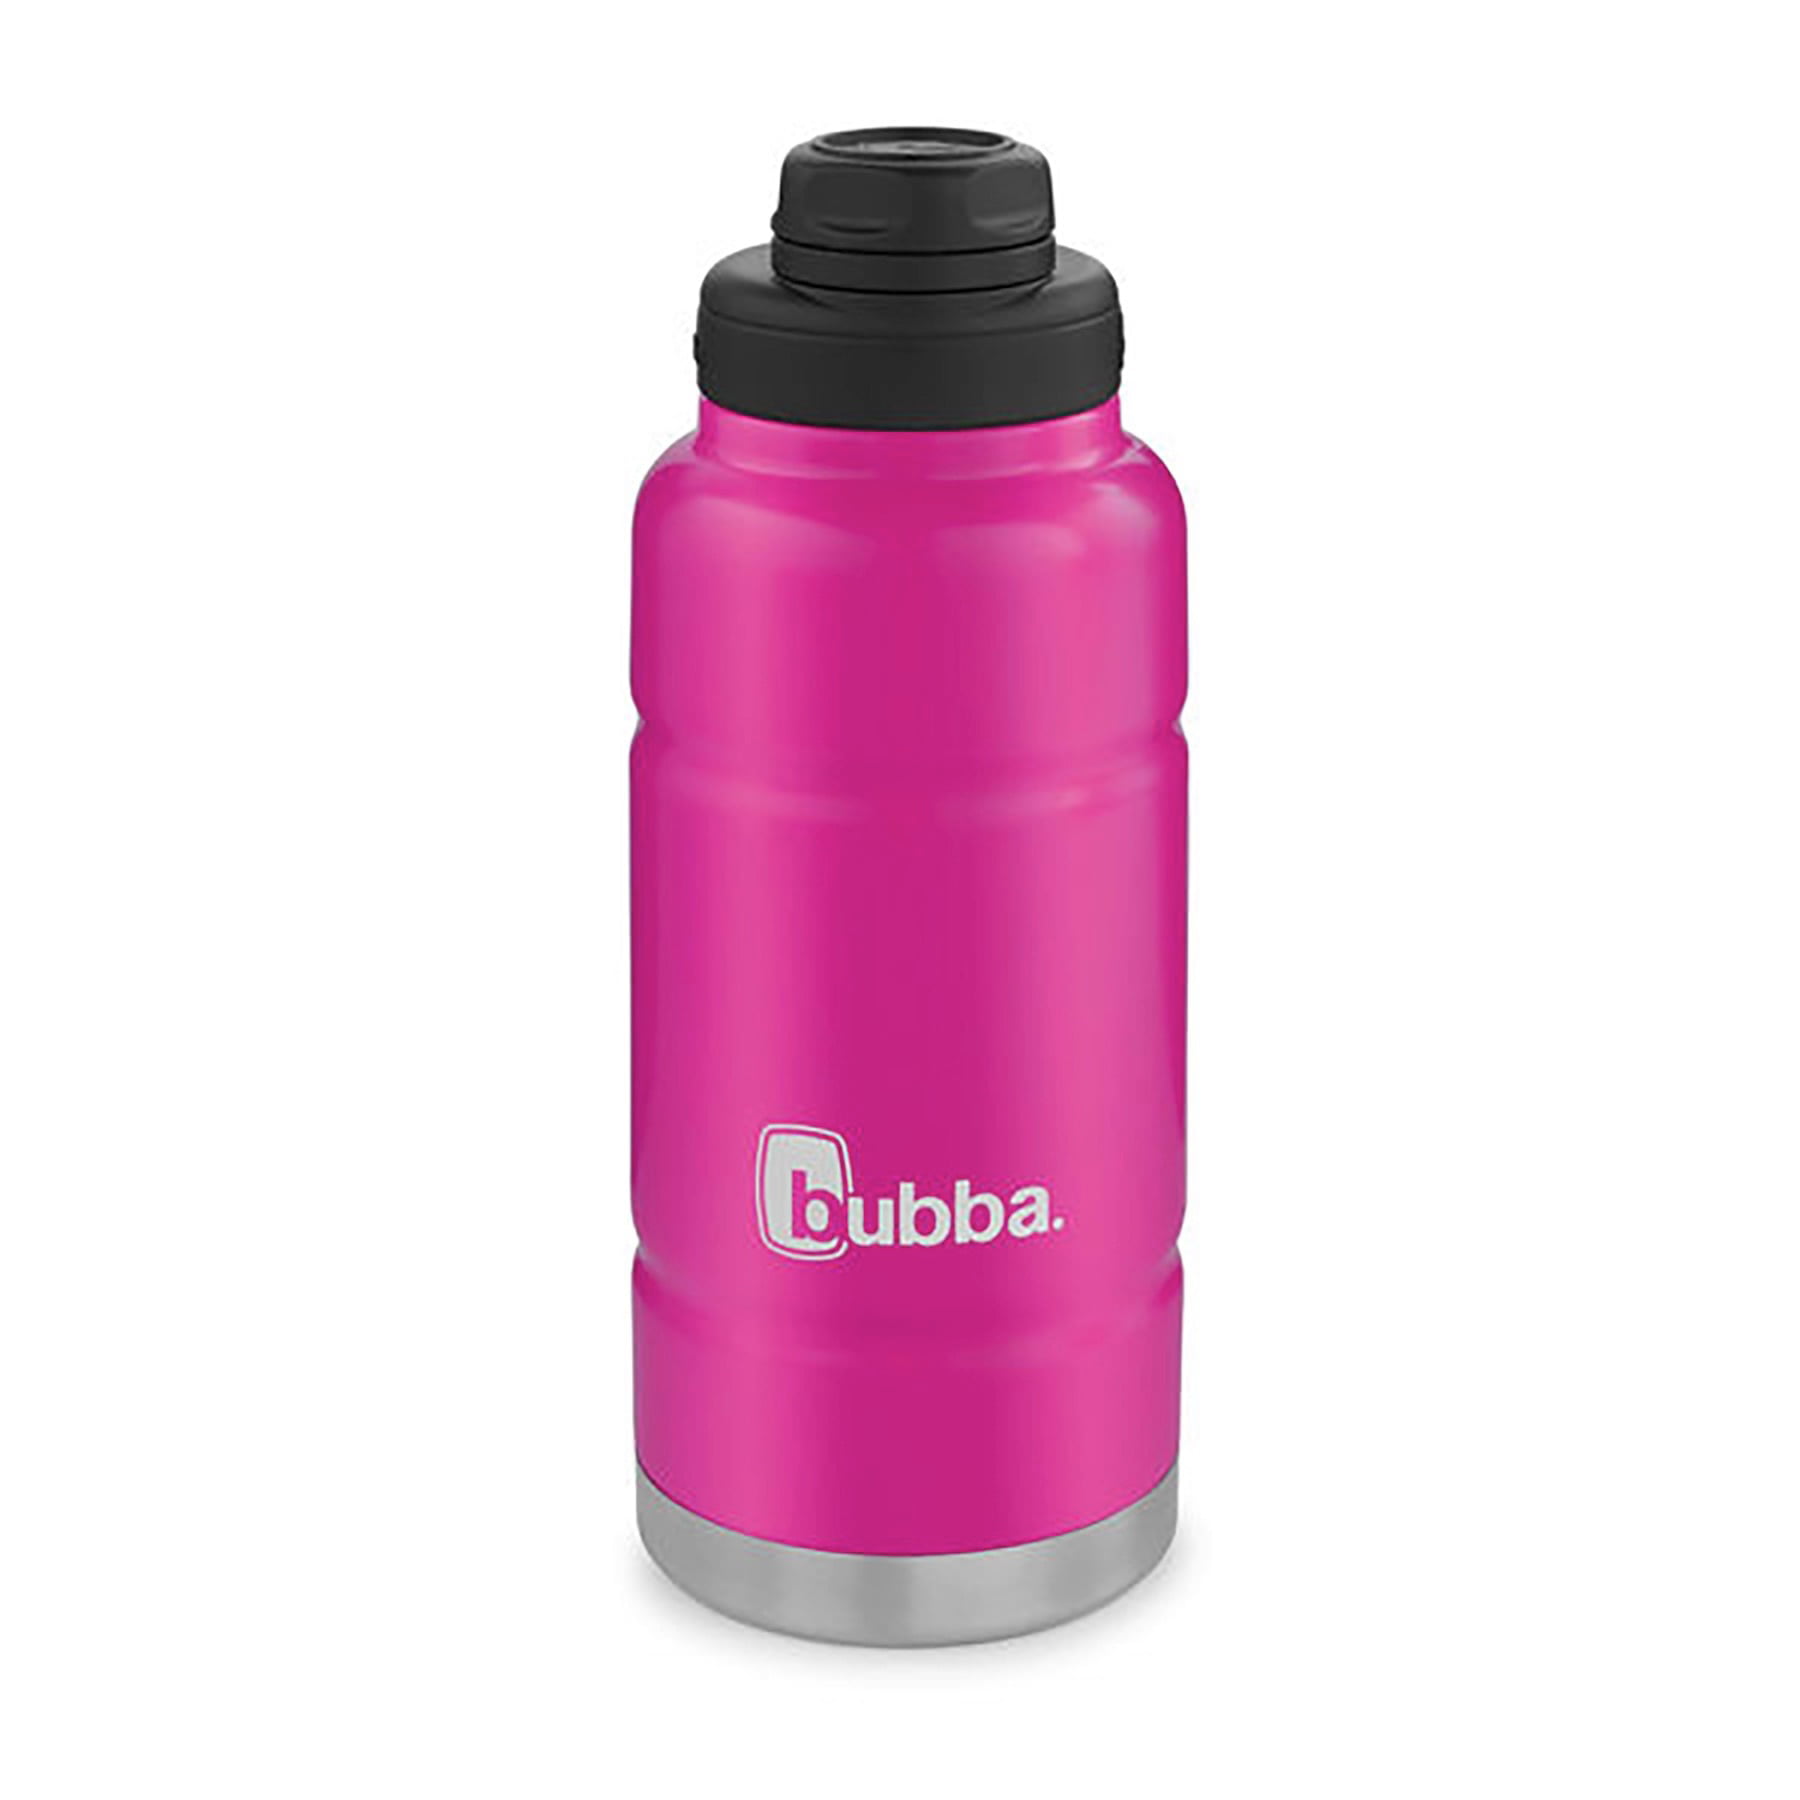 Bubba Rubberized Stainless Steel Radiant Push Button 32 oz